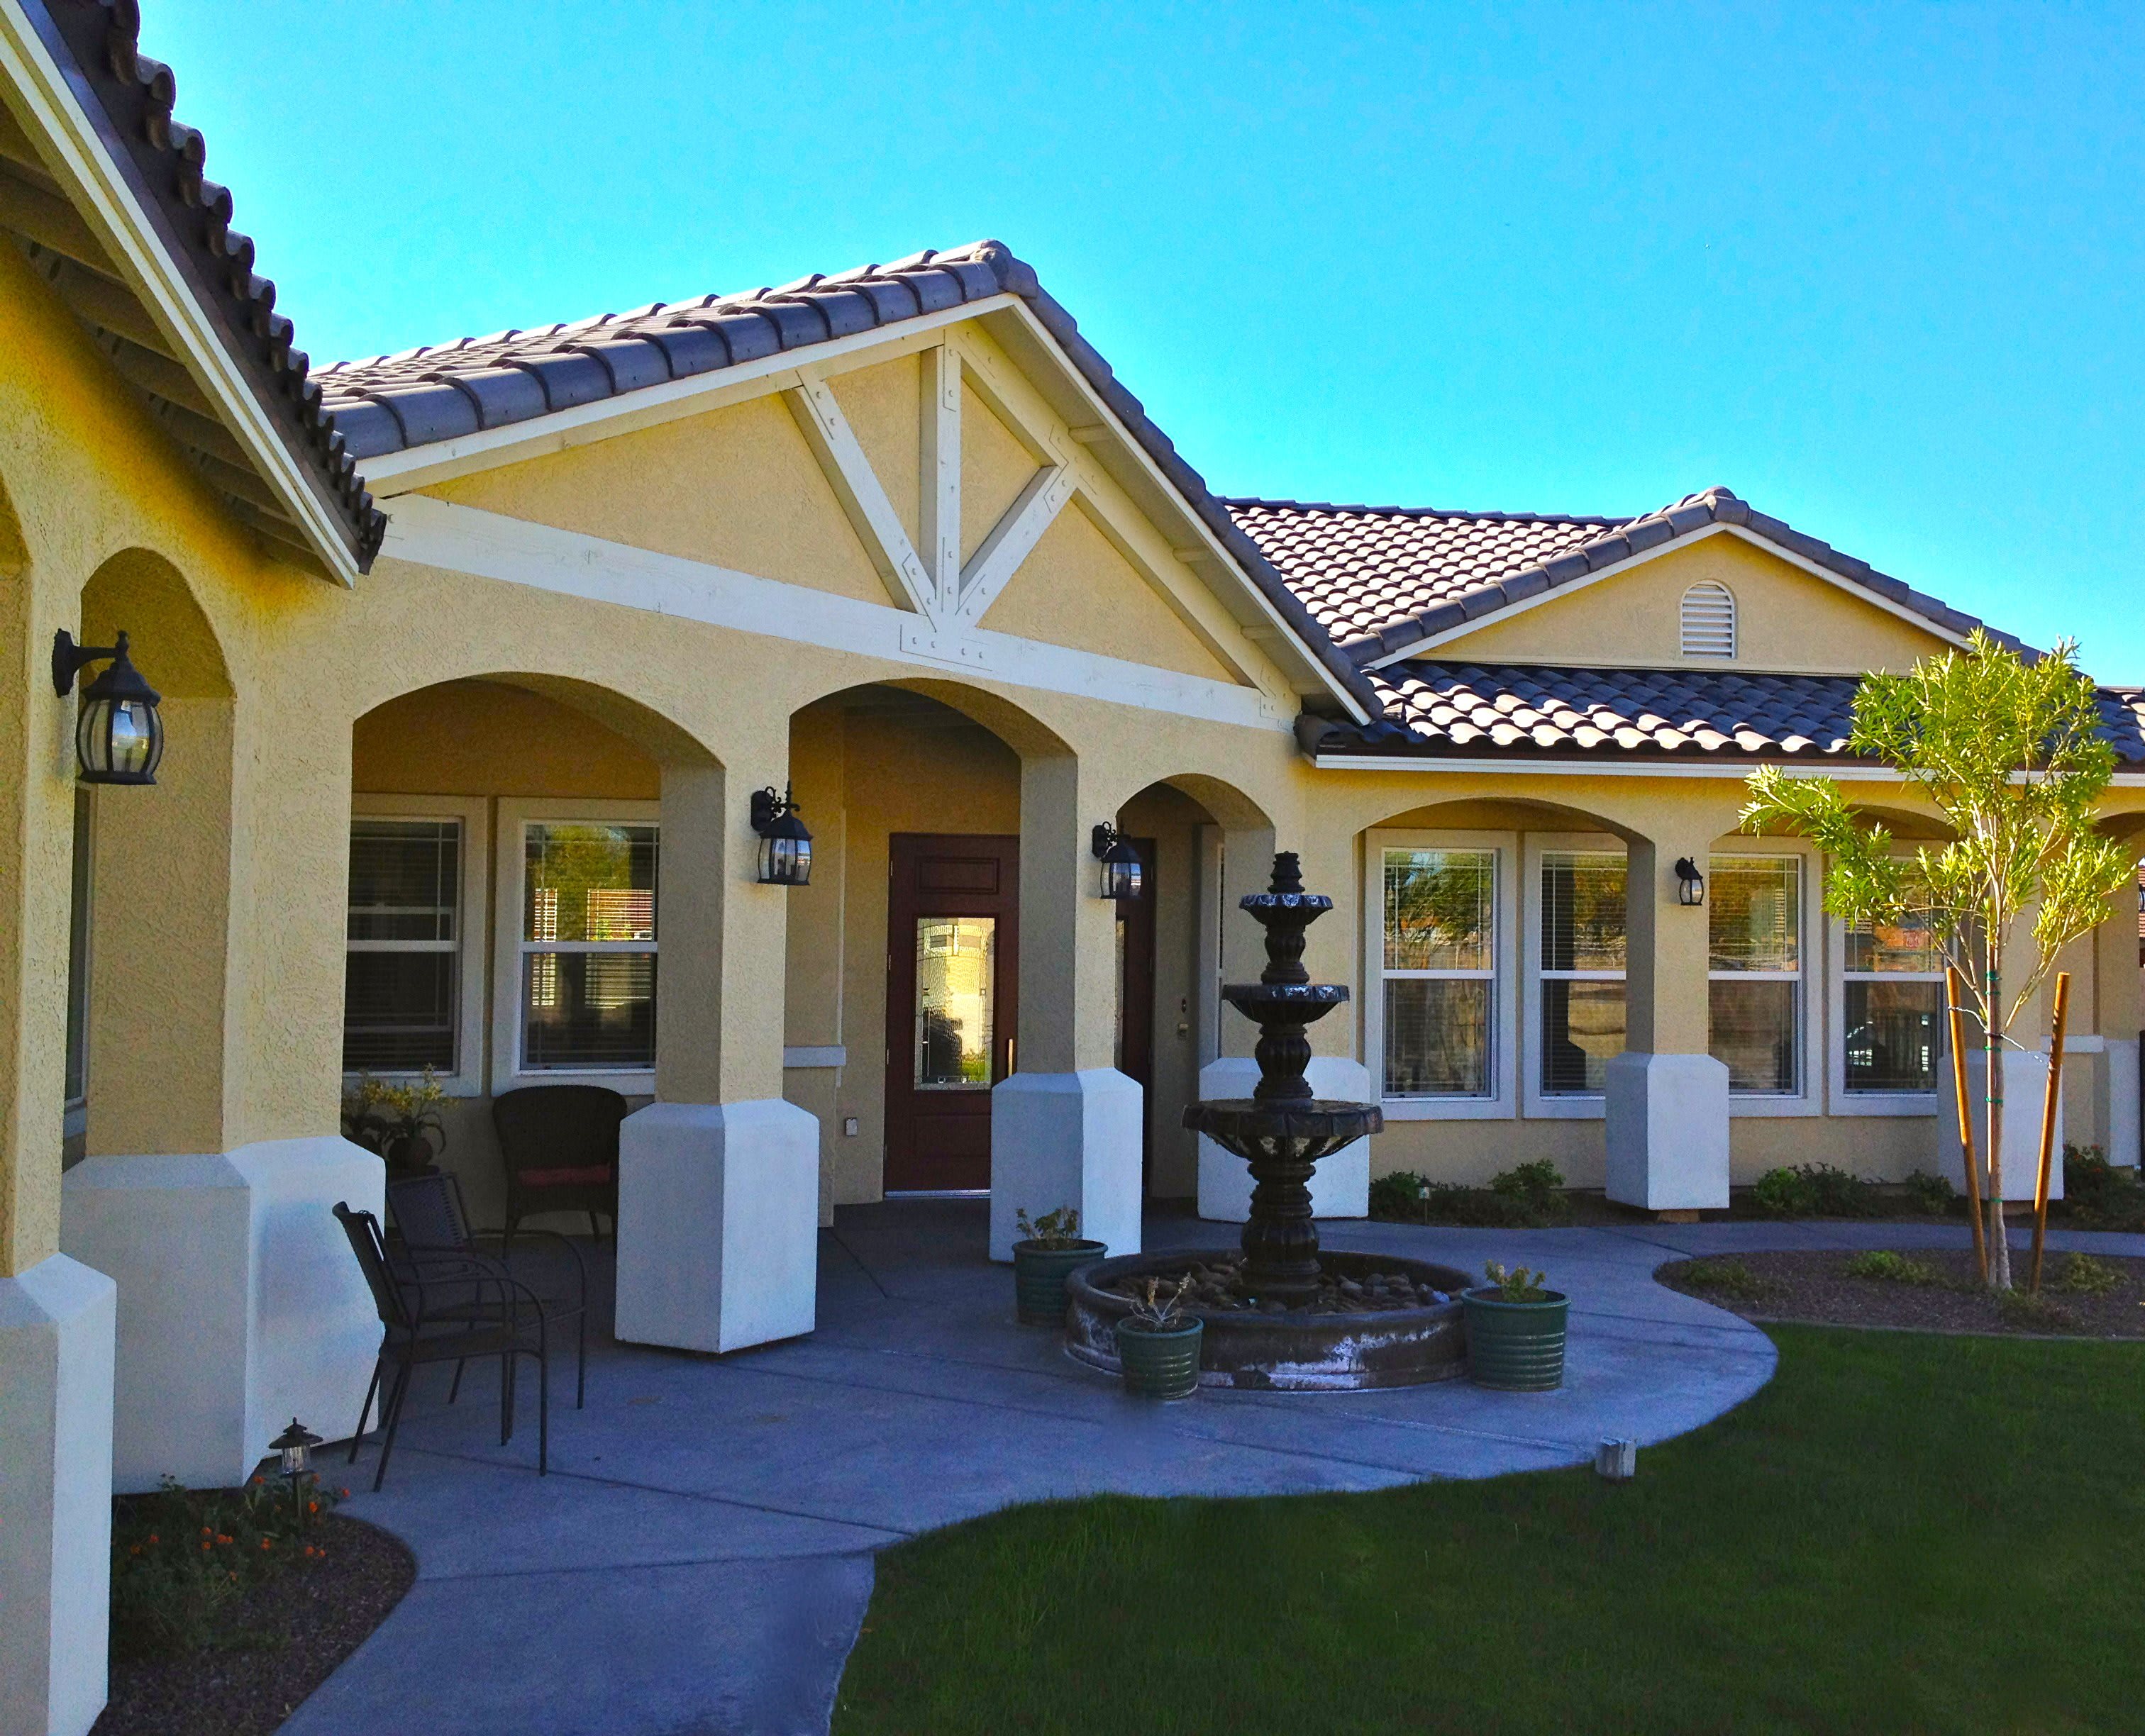 Visions Senior Living at Mesa outdoor common area